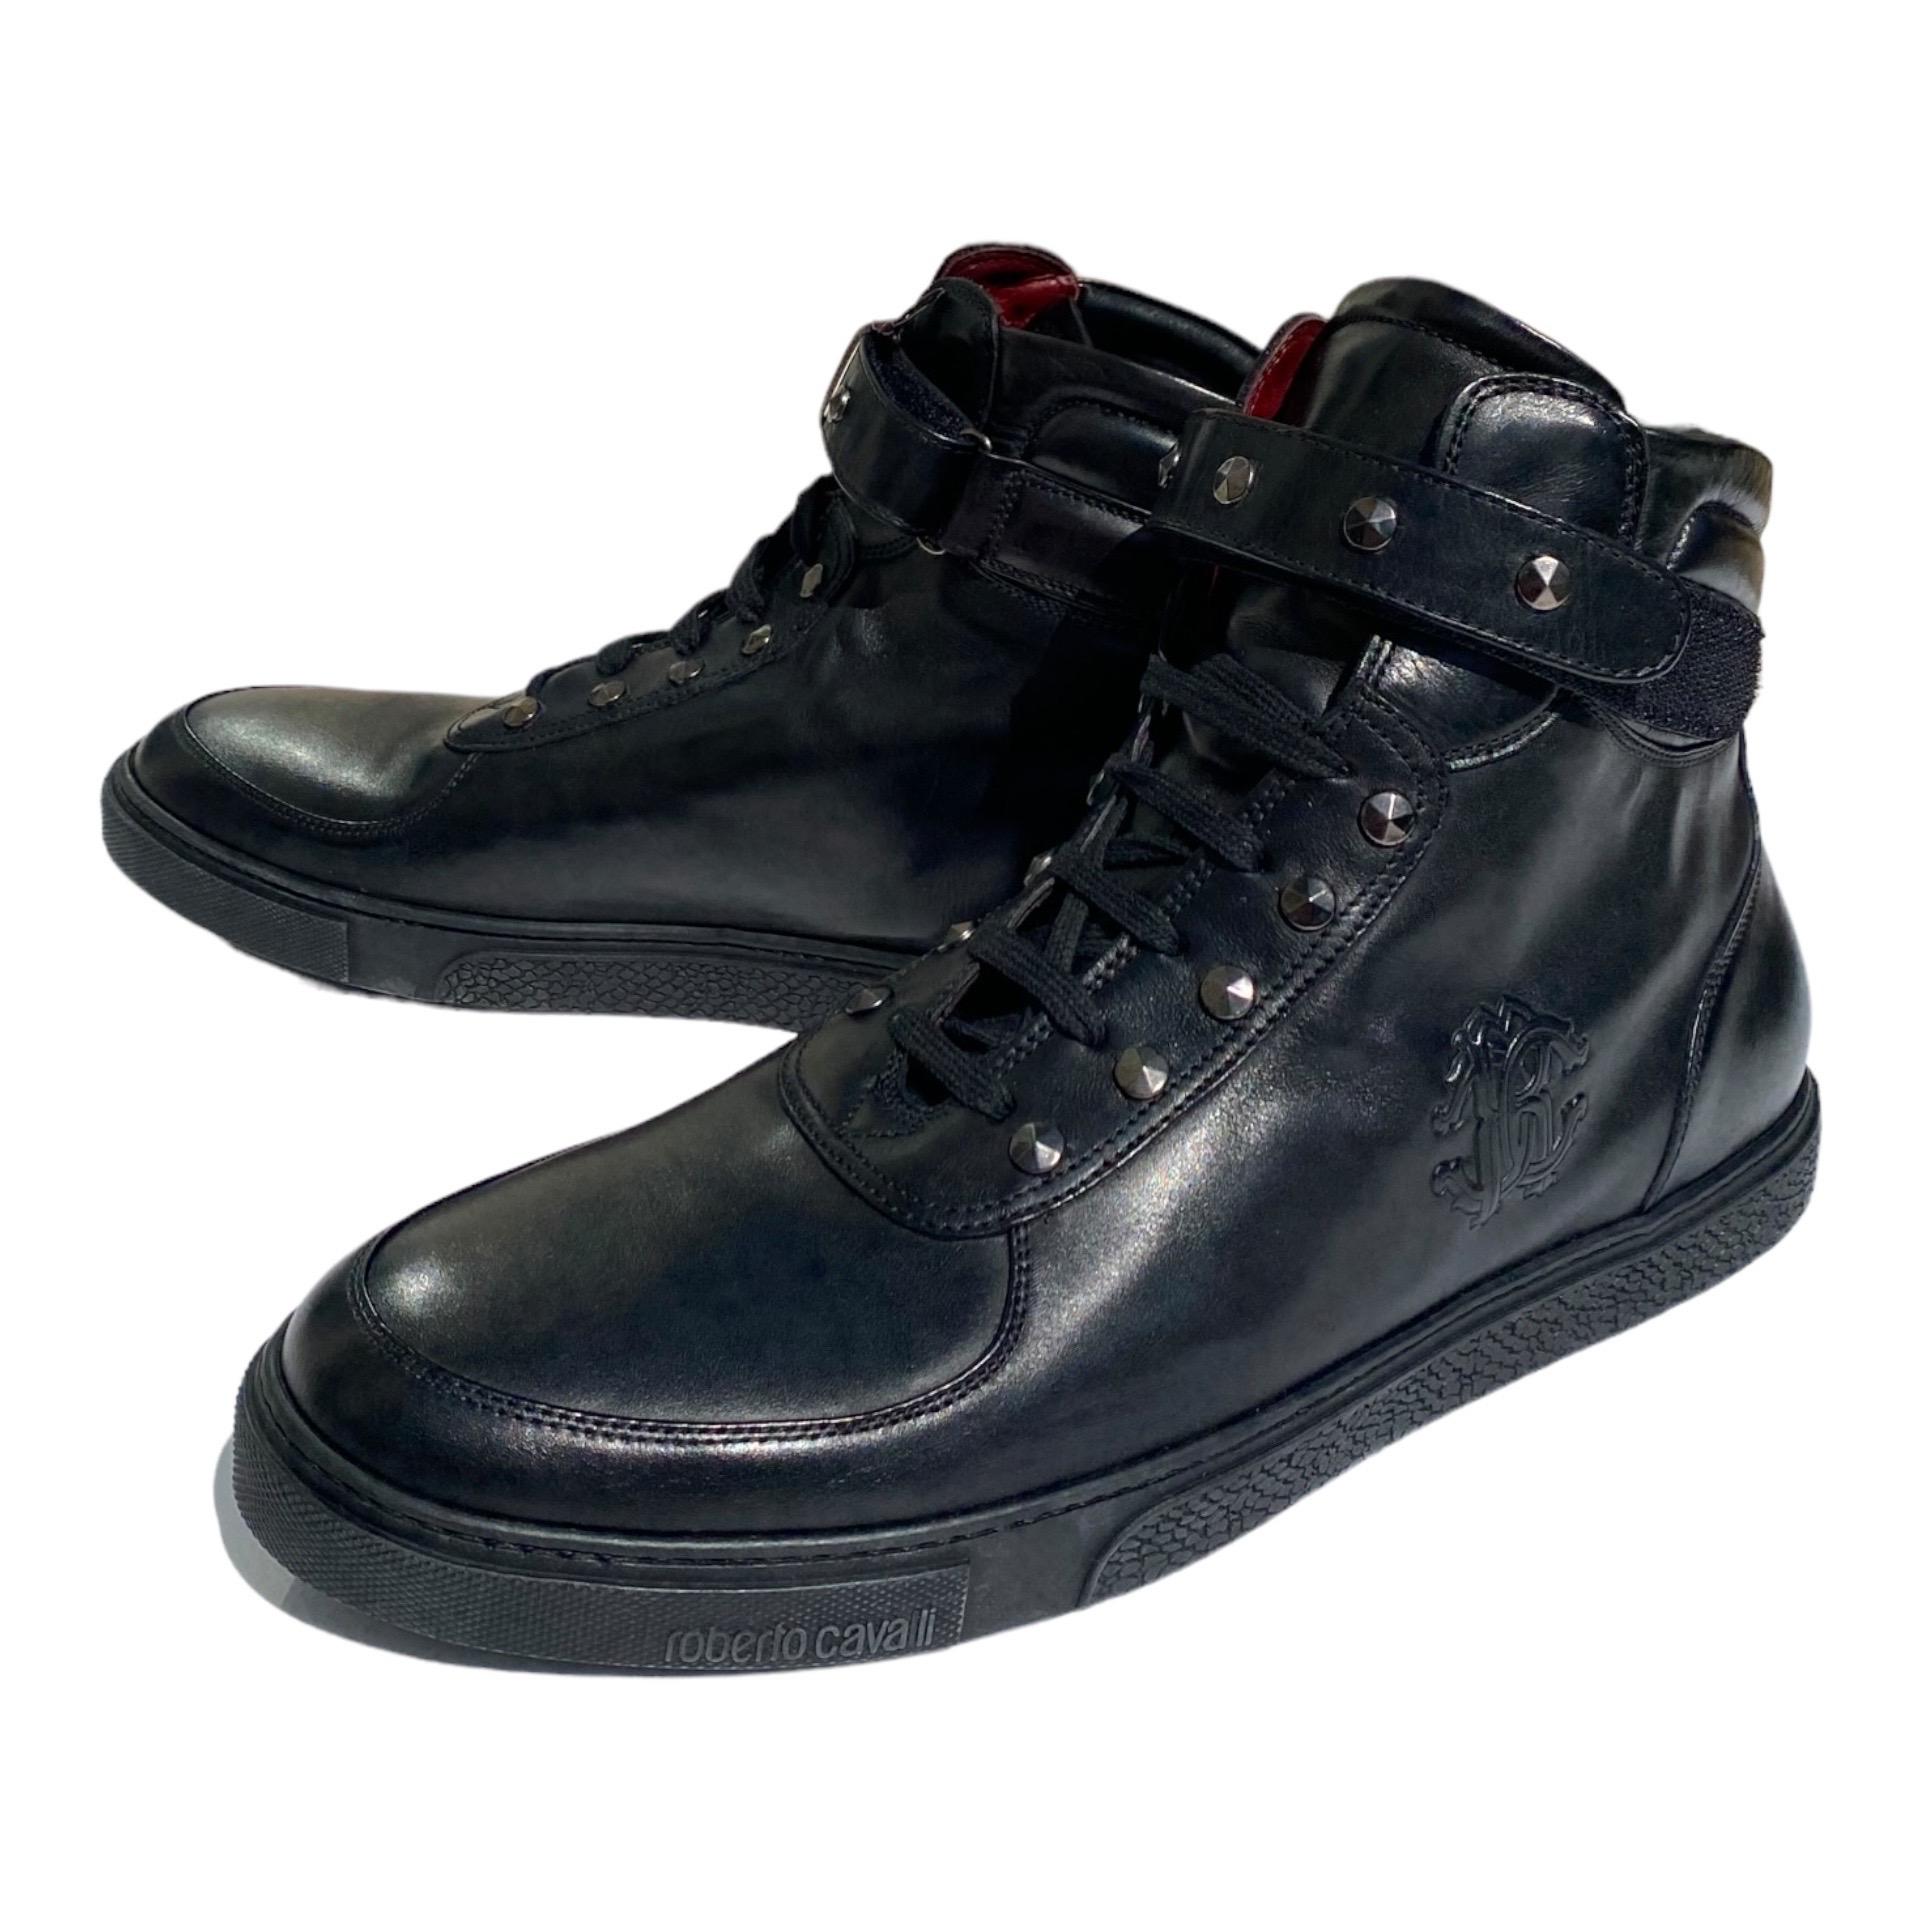 NWT Roberto Cavalli Men's Studded High Top Sneakers
Sizes available: 43.5 - 10.5, 44.5 - 11.5 and 45 - 12 
These all weather sneakers is constructed from premium materials with incredible details for a comfortable luxurious fit.
Color: Black, 100%